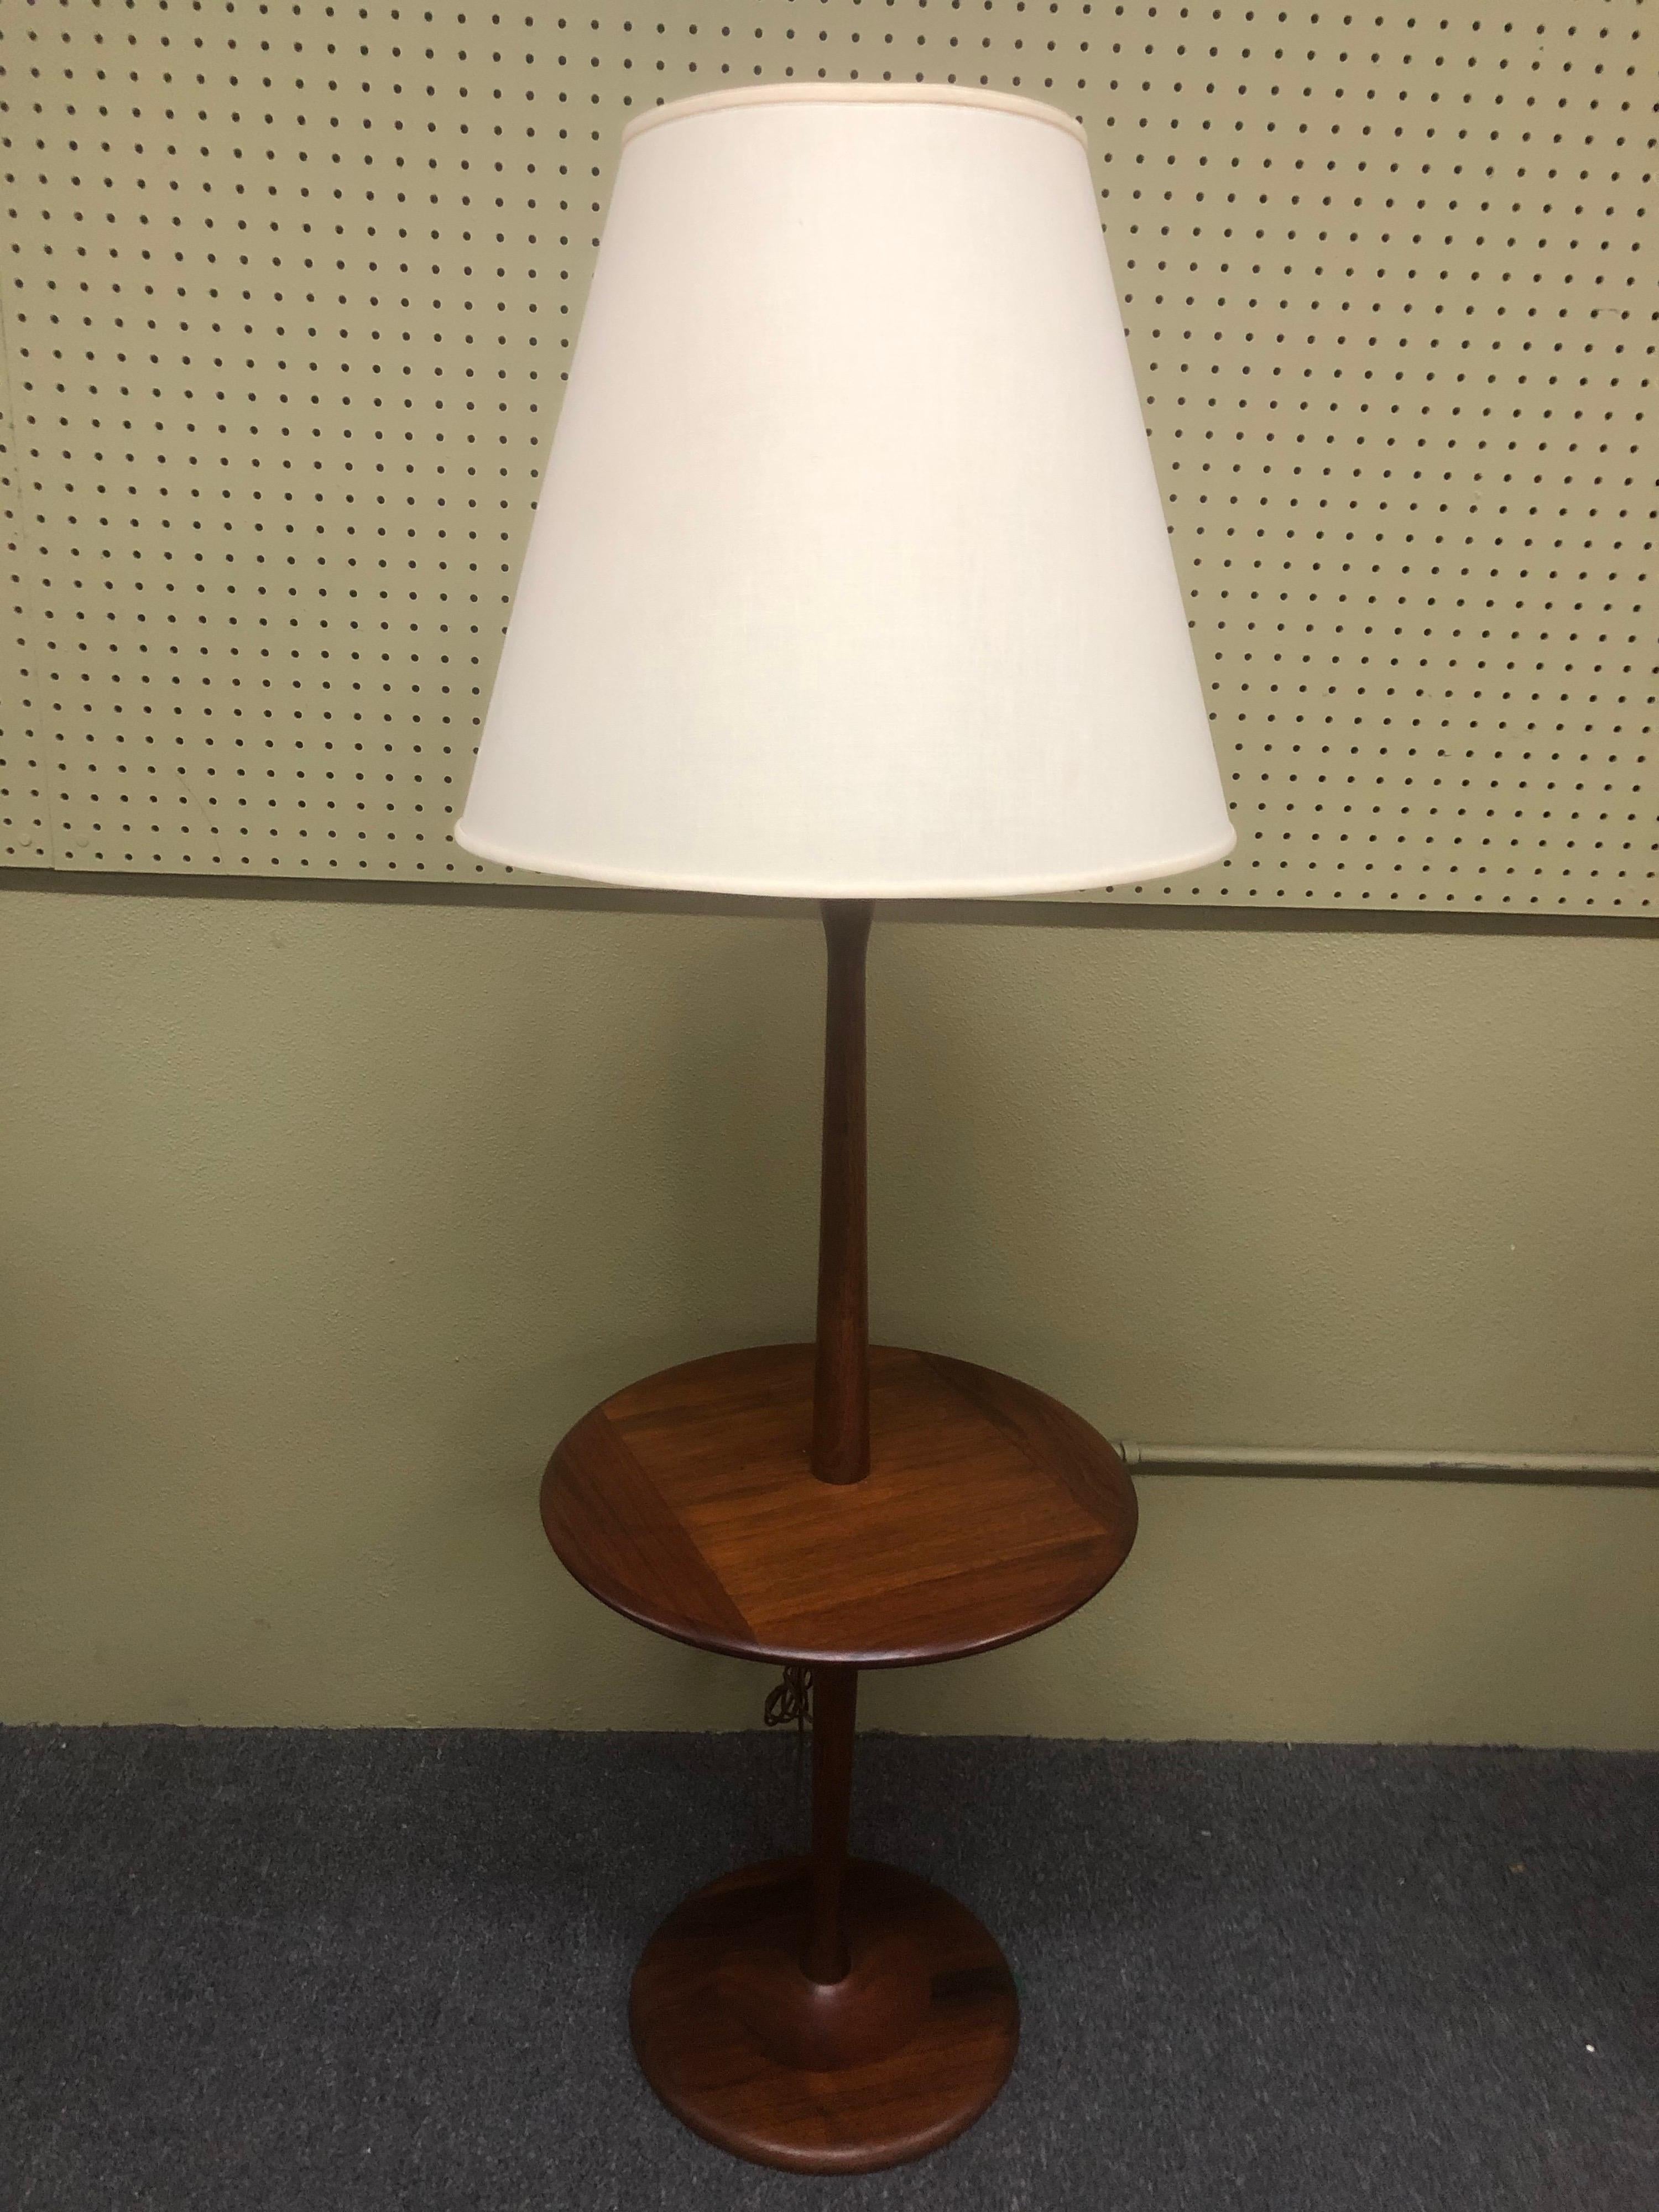 Simple and elegant Danish modern solid teak table and floor lamp, circa 1960s. The lamp is in very good vintage condition with the original shade; the piece measures 18.5